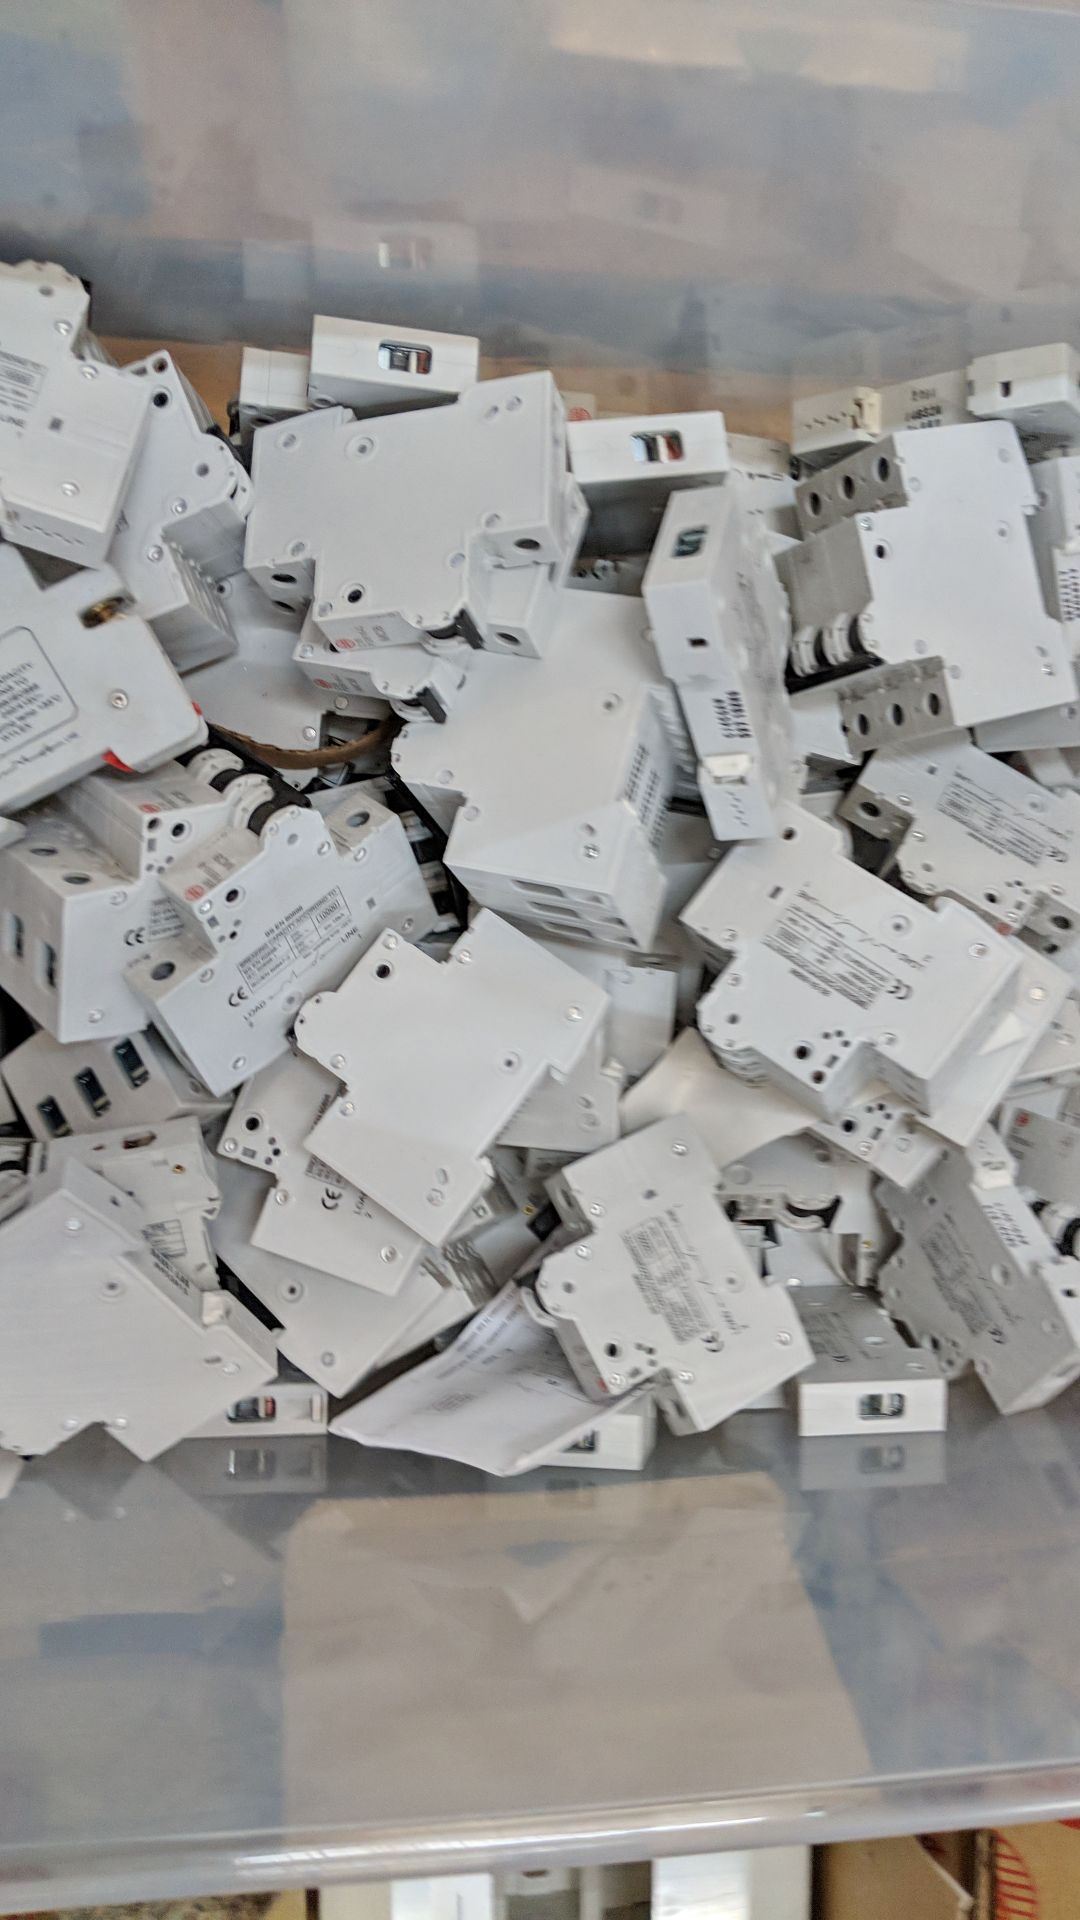 Contents of a crate consisting of a large quantity of Wylex MCB and other fuse switches - crate - Image 4 of 5